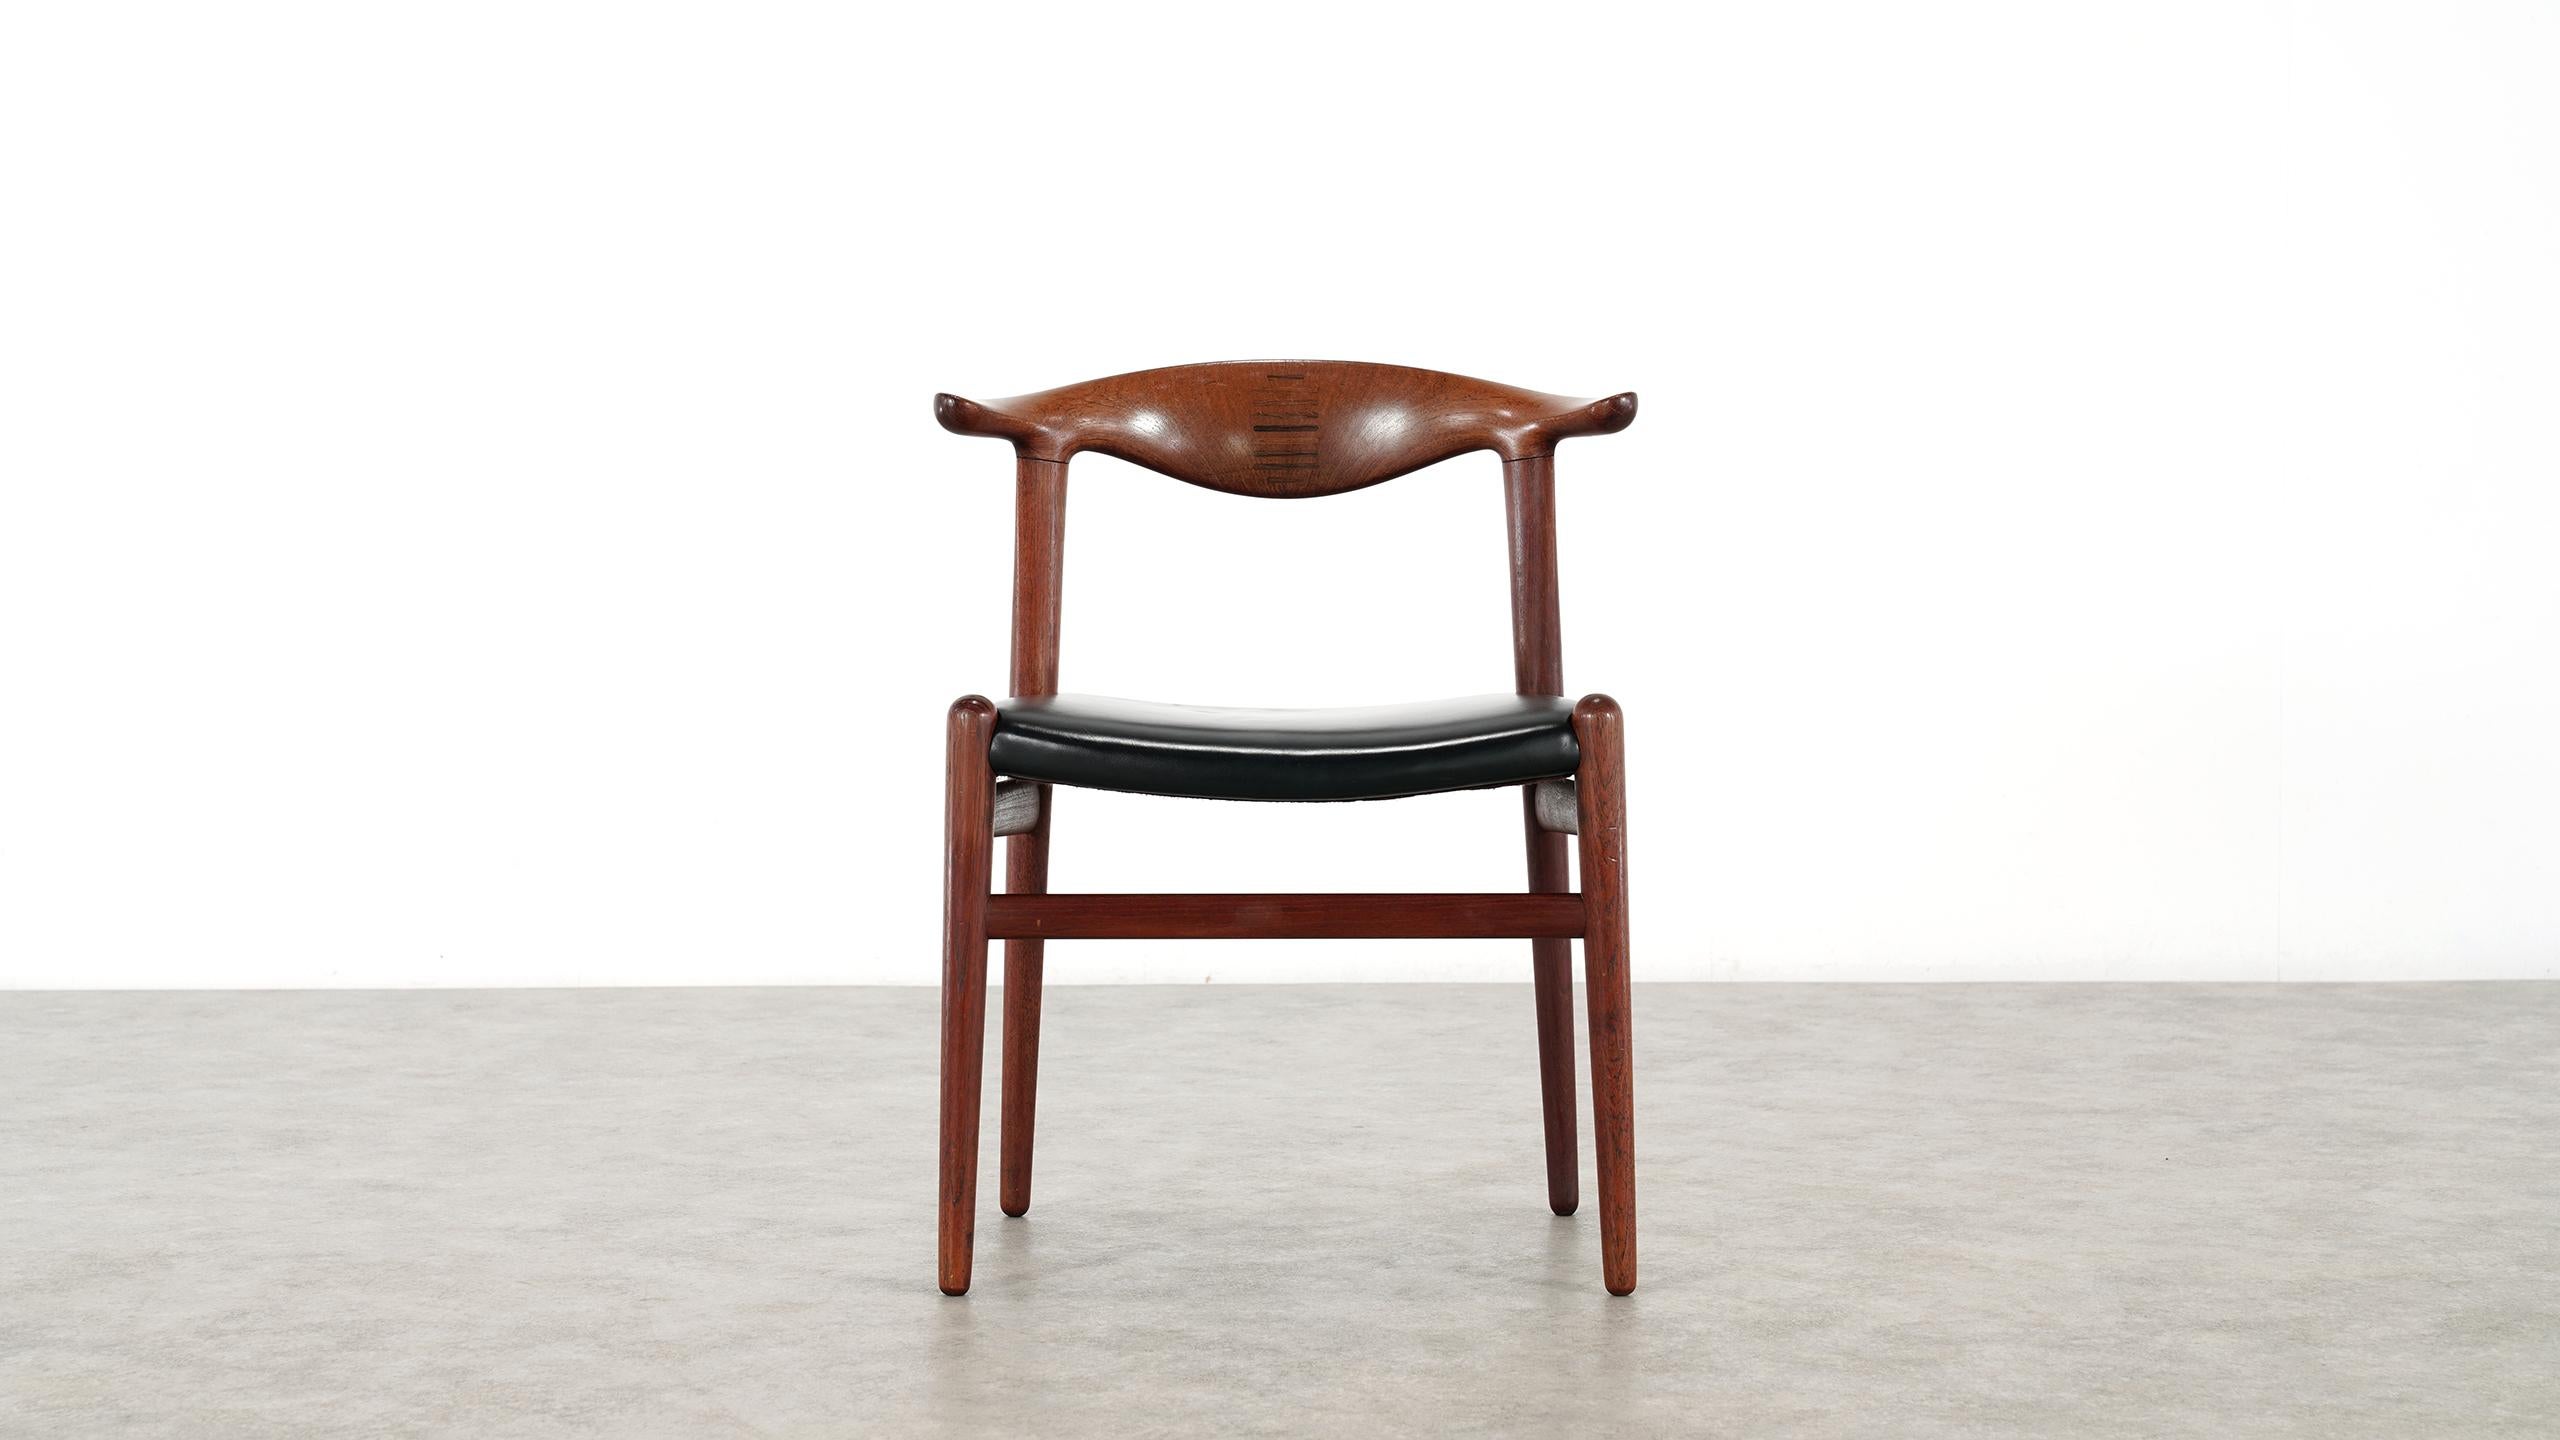 The iconic Cowhorn chair was designed in 1952 by Hans J Wegner in close dialog with master cabinetmaker Johannes
Hansen.

This chair is in original condition and shows a fine patina form the use over many years. Upholstery in black leather. Made